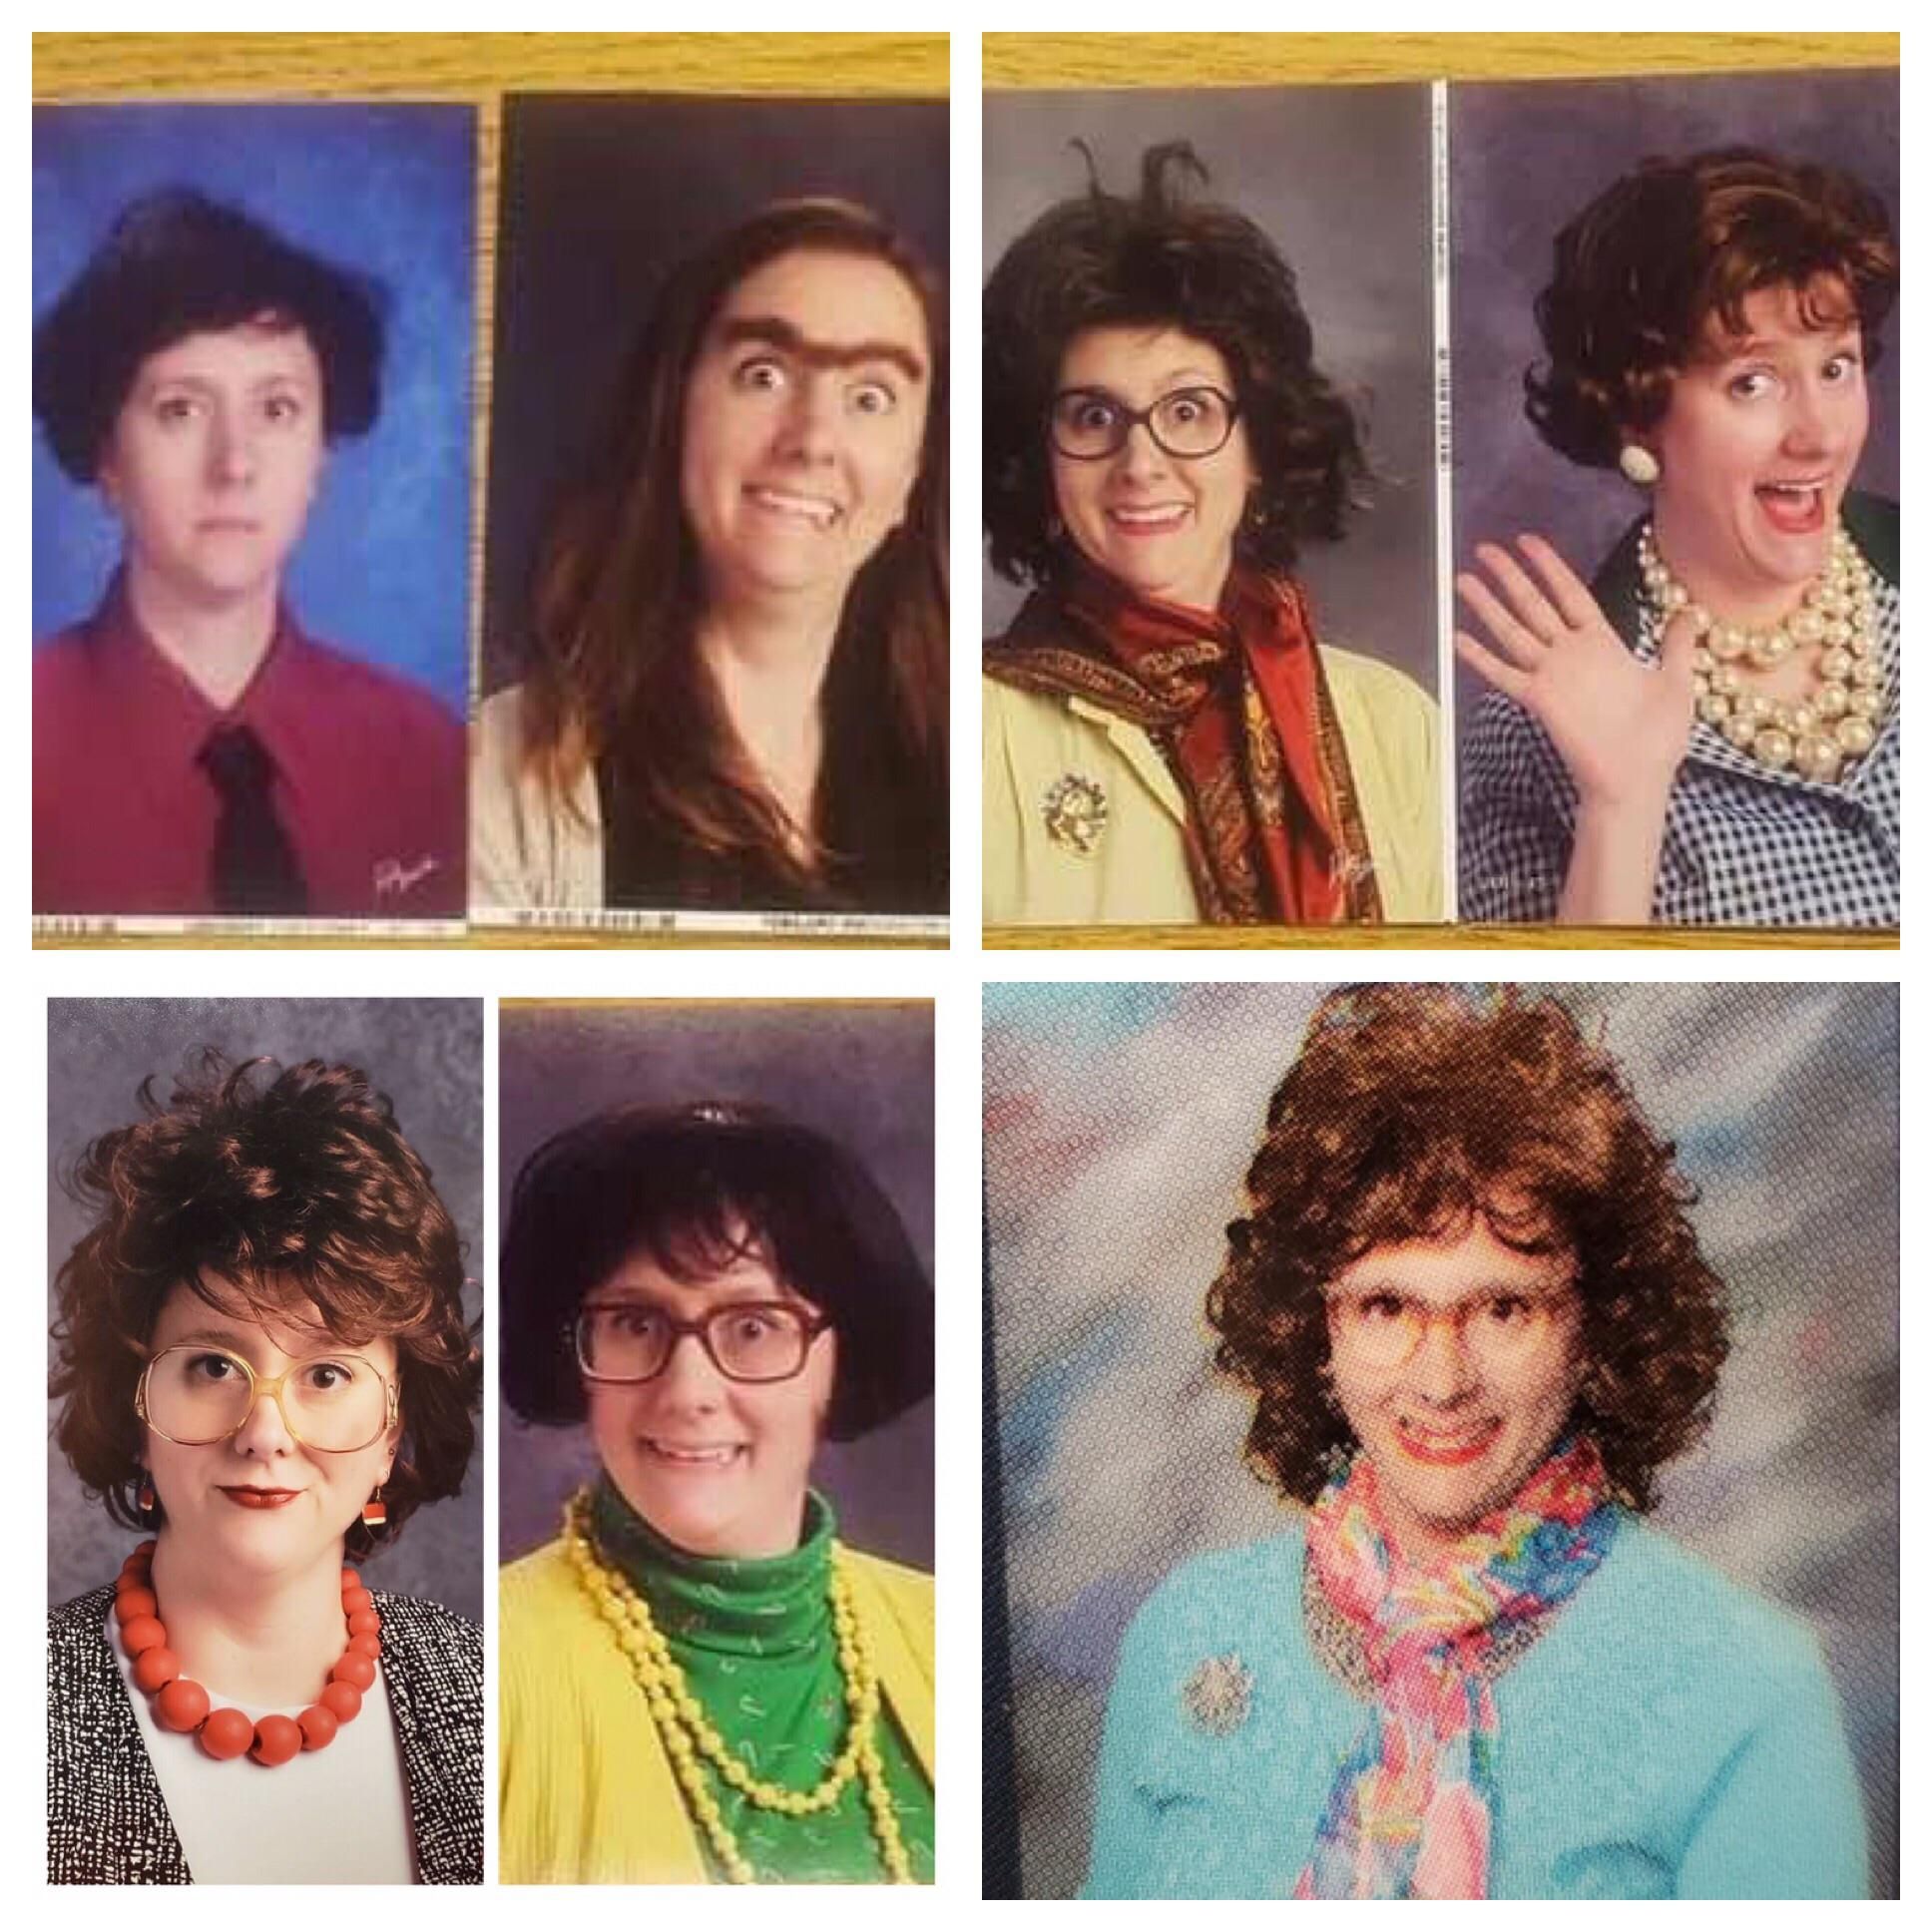 One of my old teachers does different costumes for her yearbook photo every year.